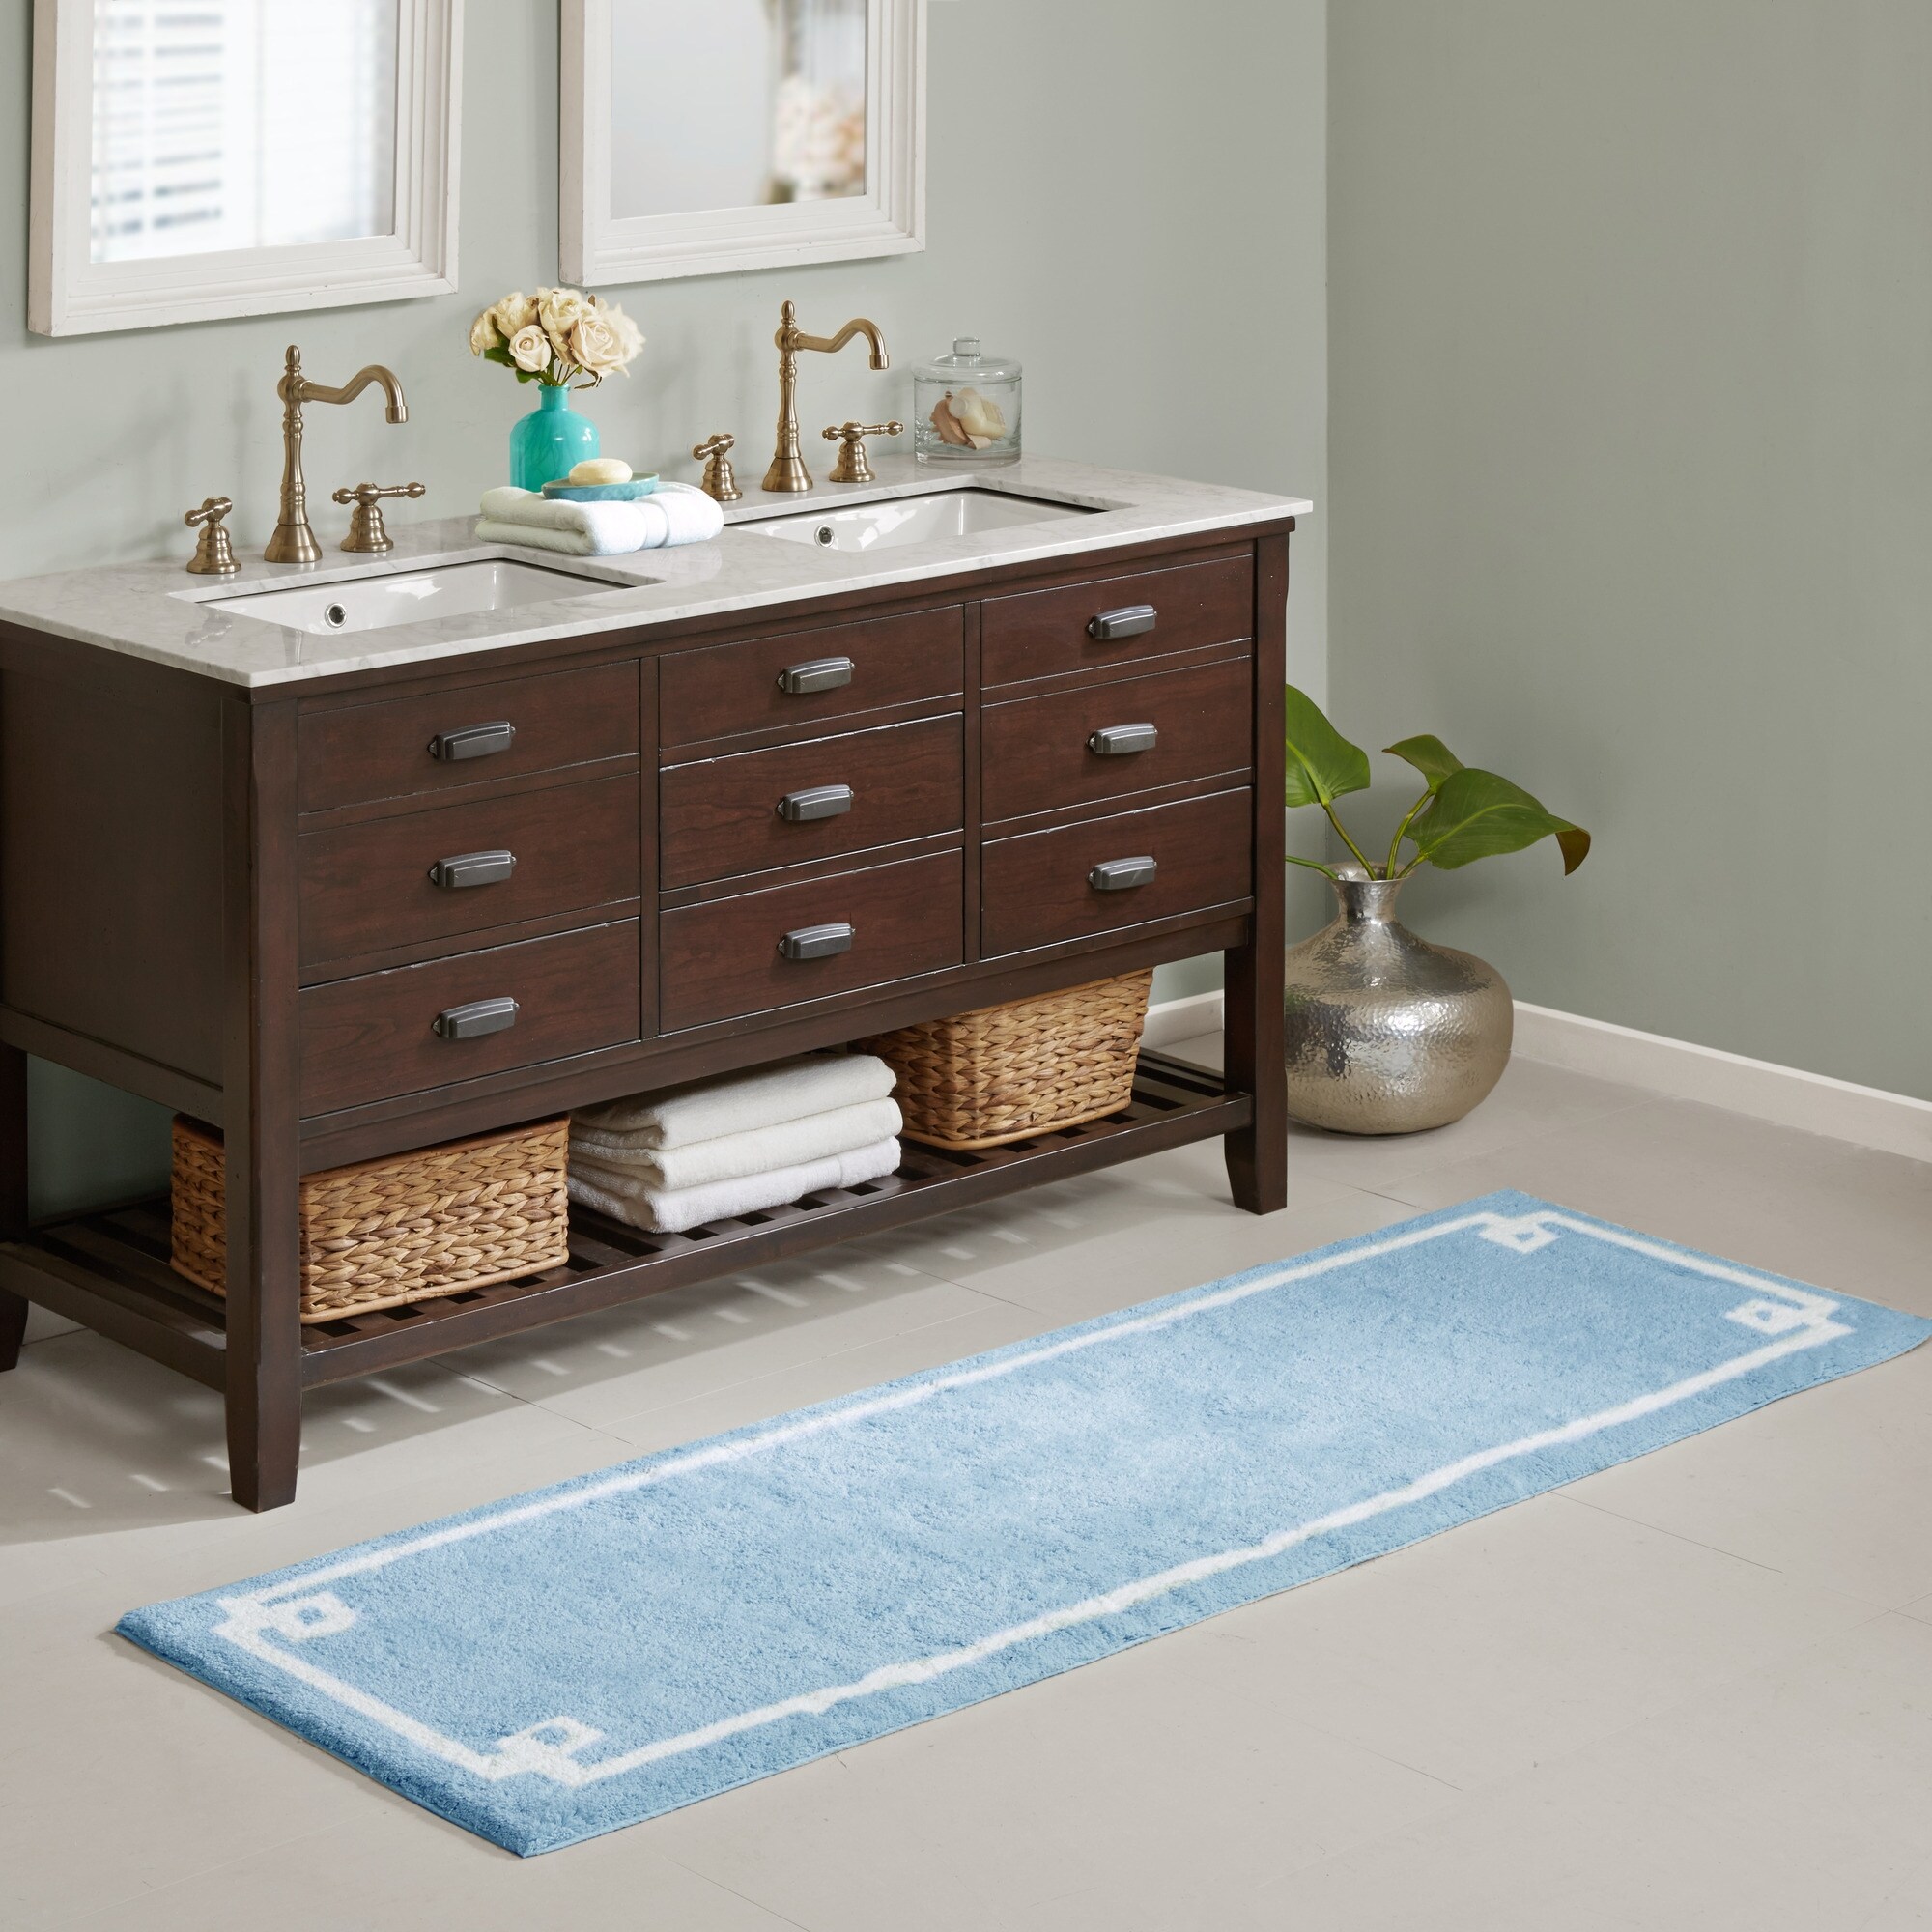 https://ak1.ostkcdn.com/images/products/is/images/direct/de7dd3aa15345c4d3c286320a7152ecd3cd41c2a/Madison-Park-Ethan-Cotton-Tufted-Bath-Rug.jpg